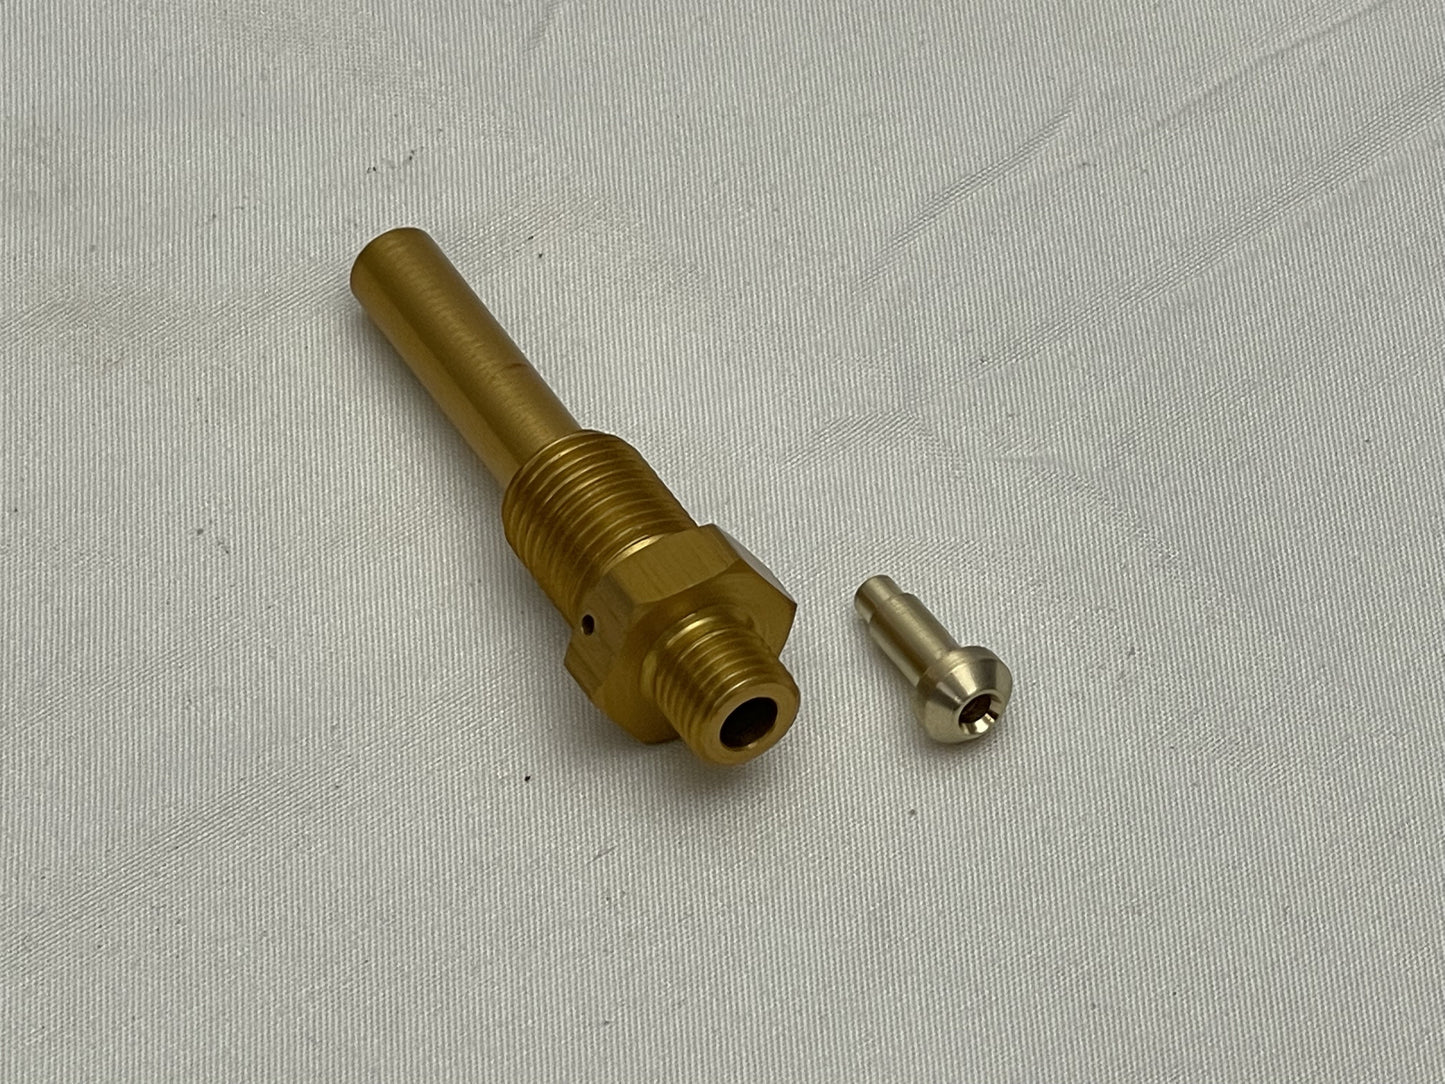 Nozzle Resizing Service and Conversion